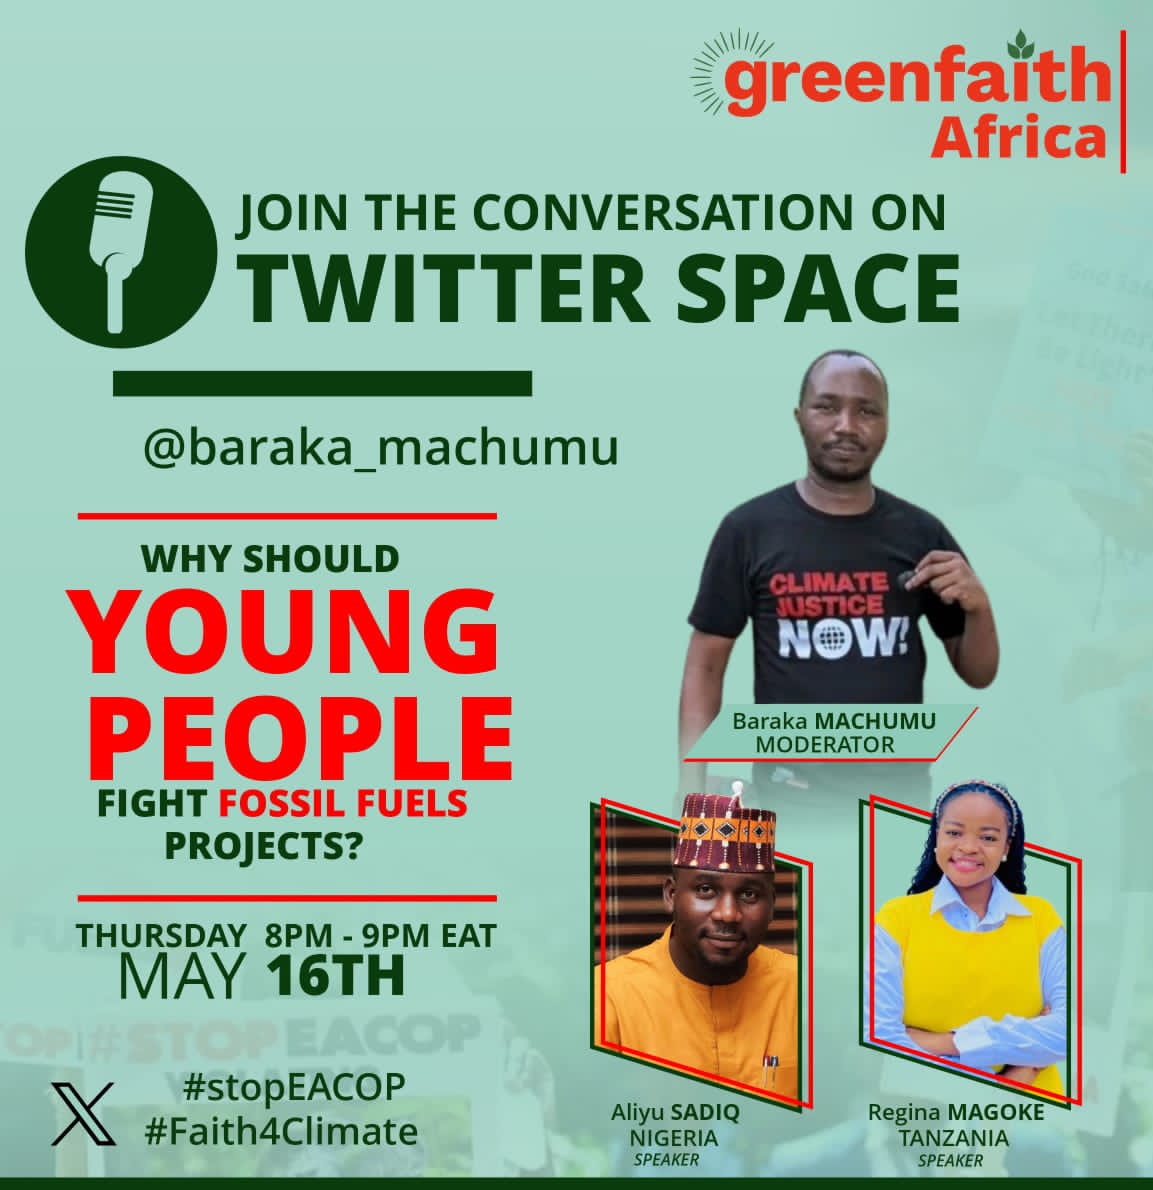 I will be joining other speakers from Africa to share perspectives on #Fossilfuels and why young people must kick against it! Don't miss out on this conversation... Date: Thursday 16th May Time: 8 PM (E.A.T) or 6PM (W.A.T) Follow @GreenFaith_Afr #Faiths4Climate #StopEACOP